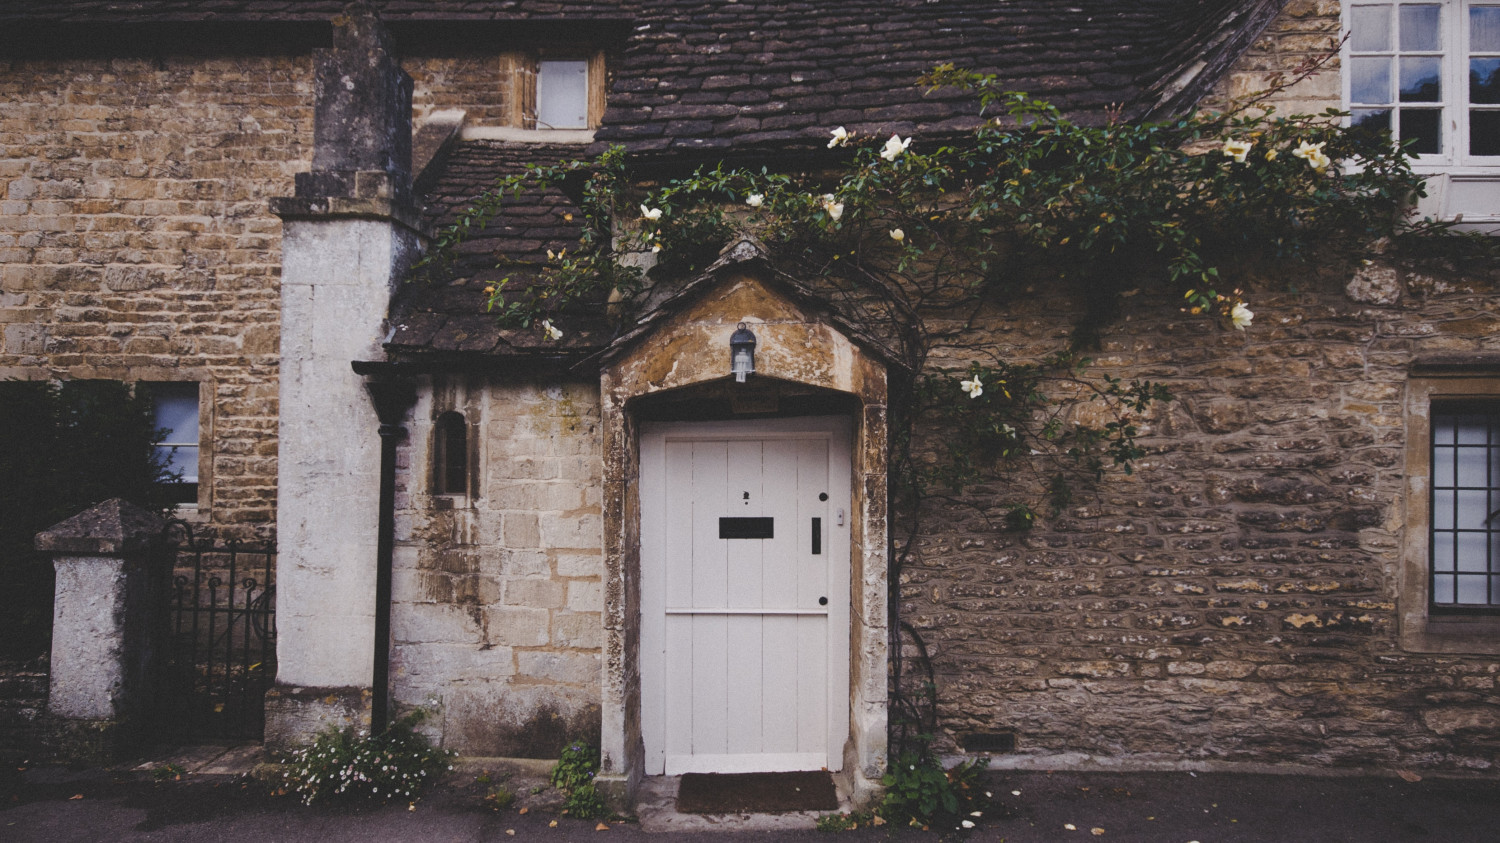 Image of a door to a stone building